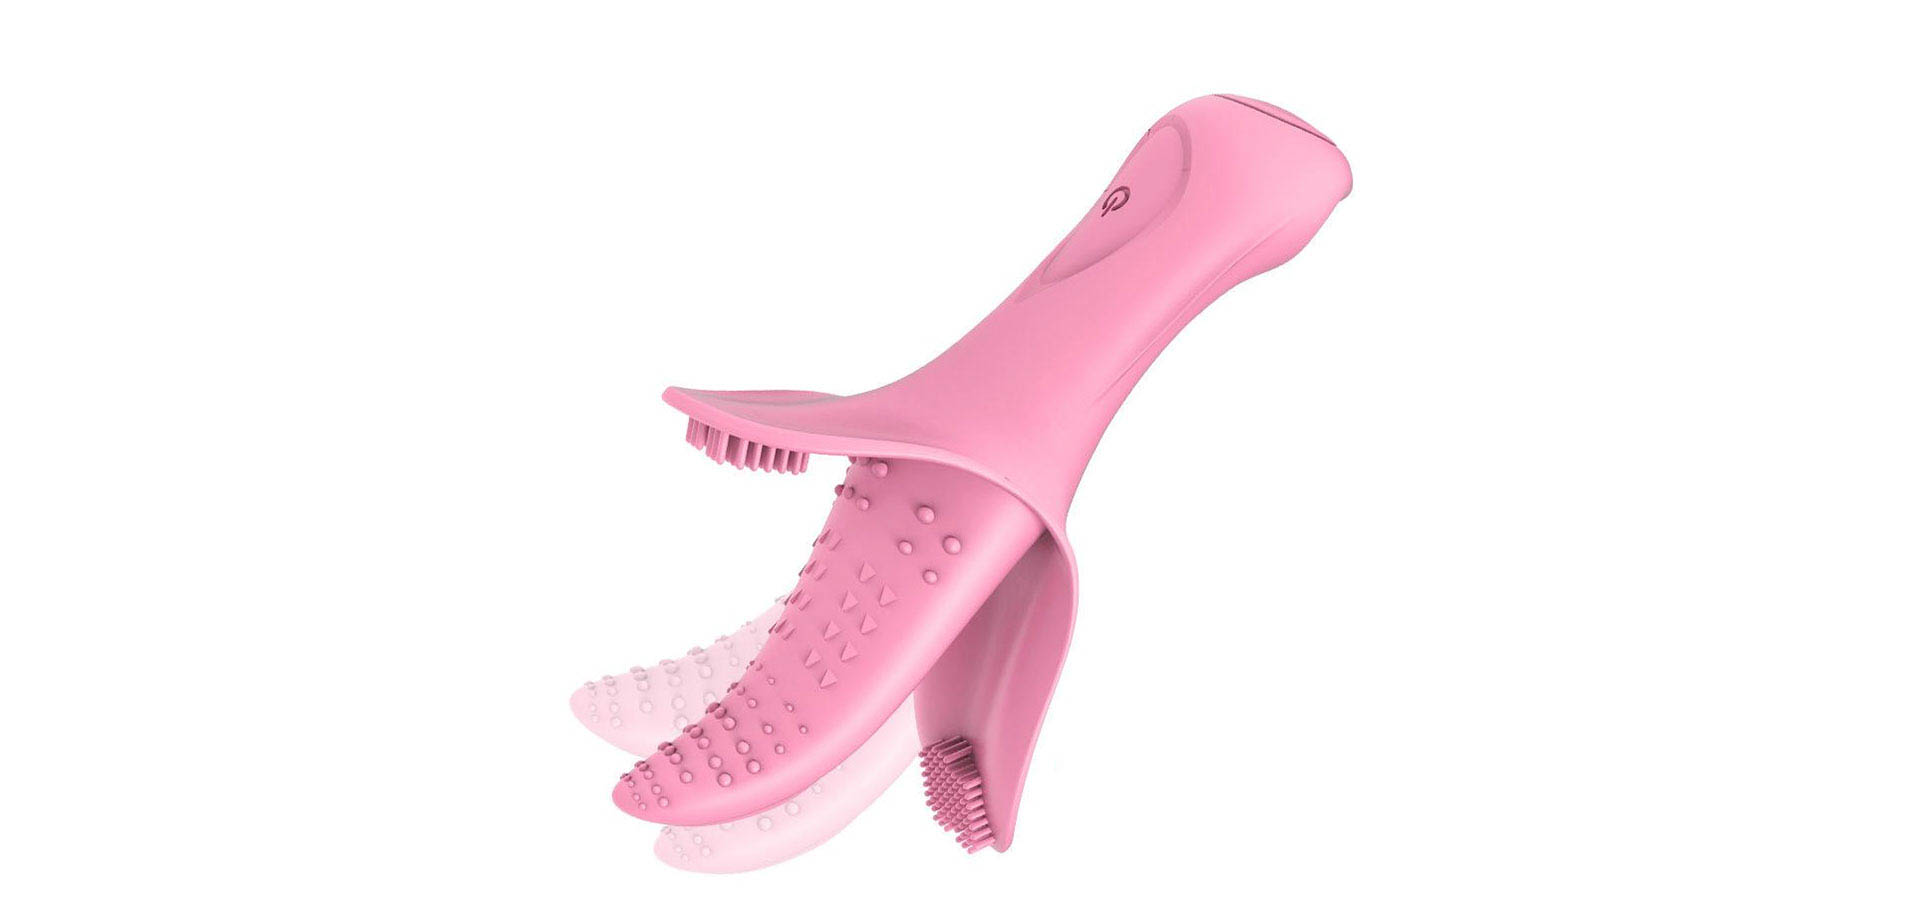 Licking Vibrator For Woman.